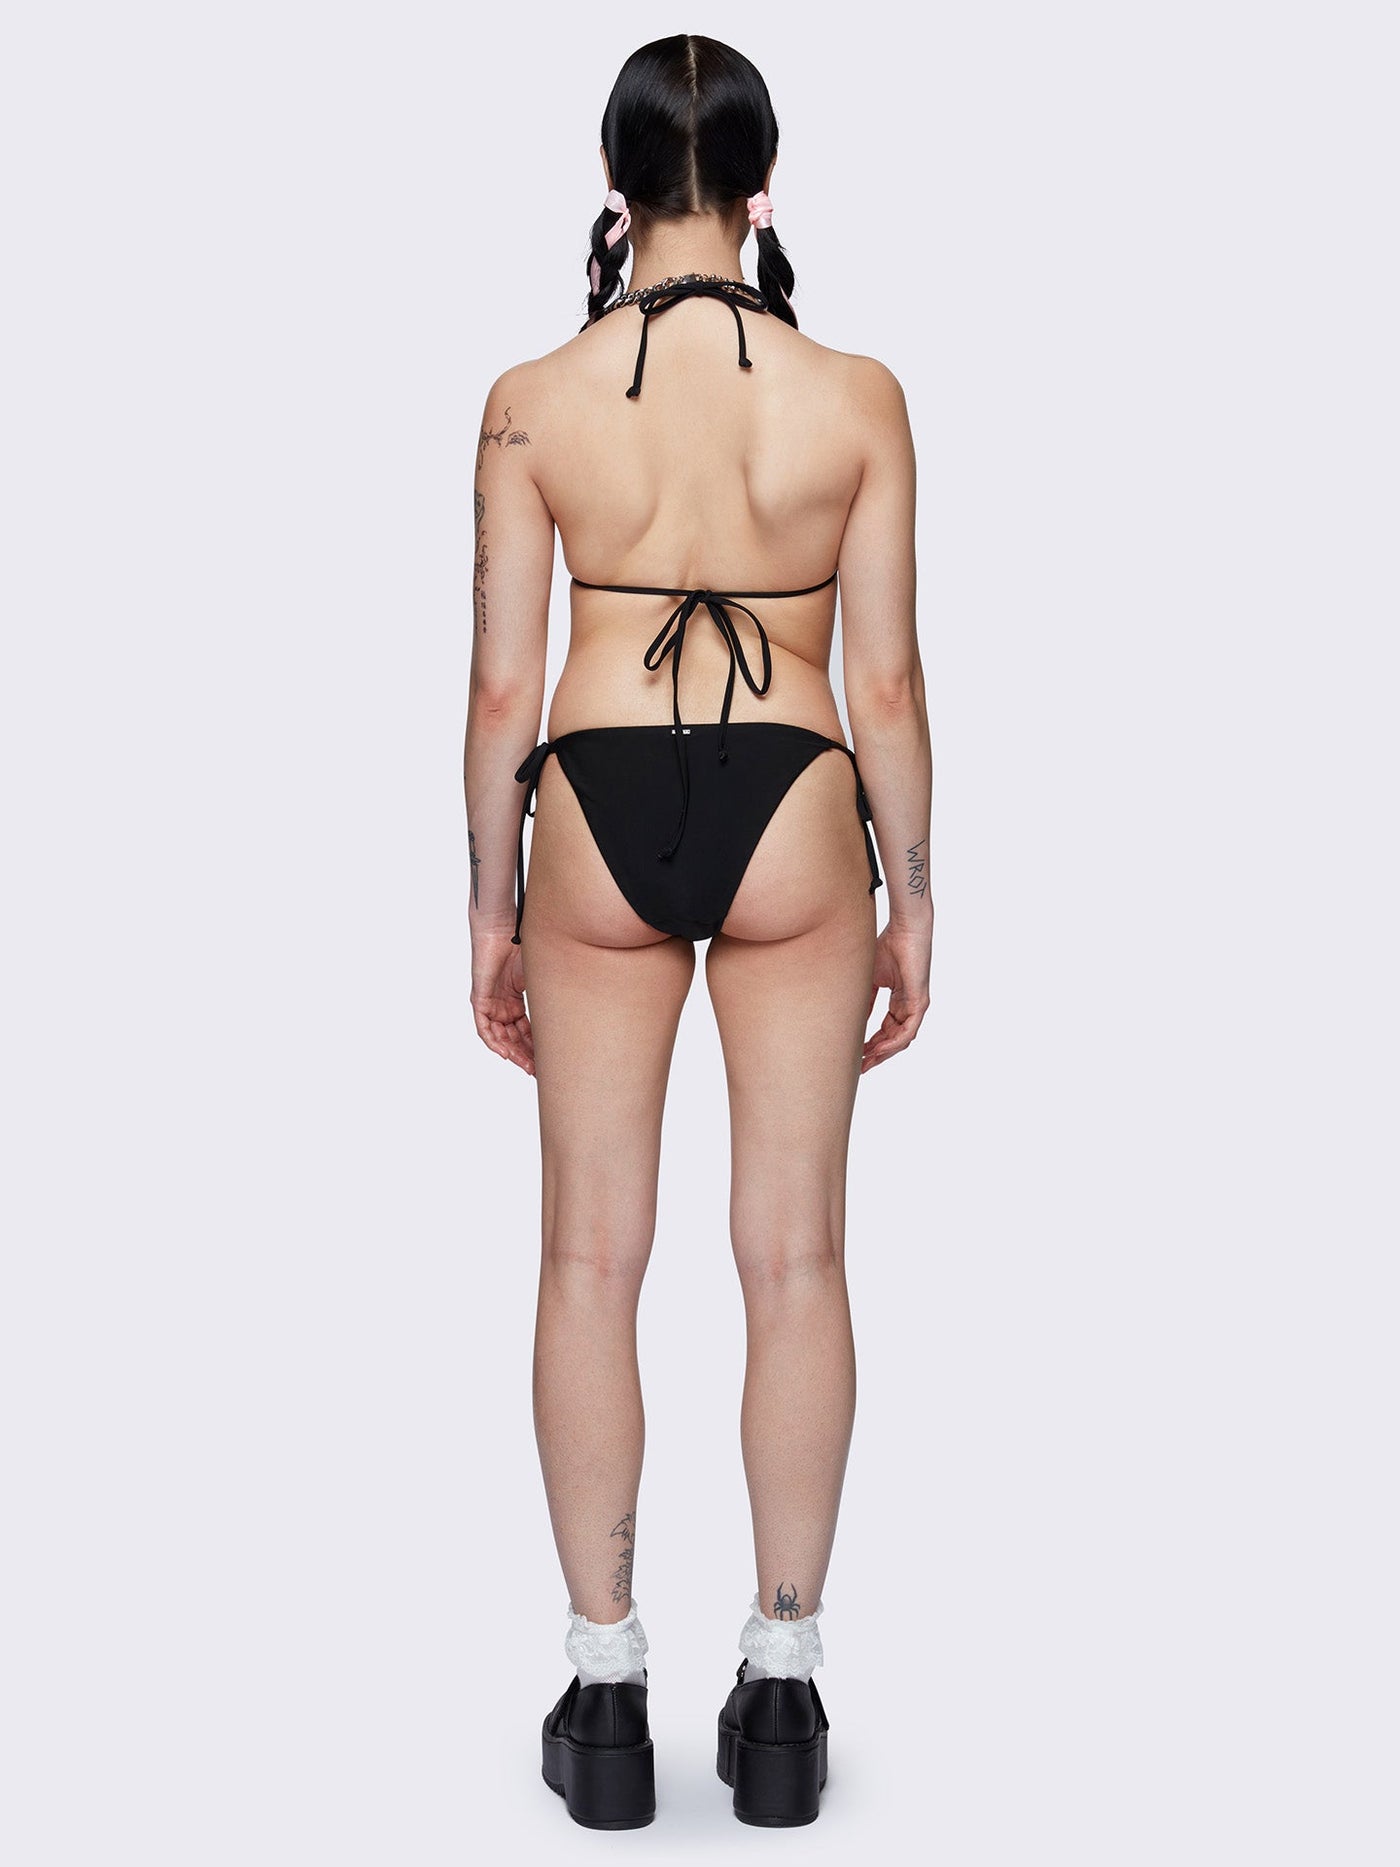 Bikini bottoms in black with adjustable tie sides